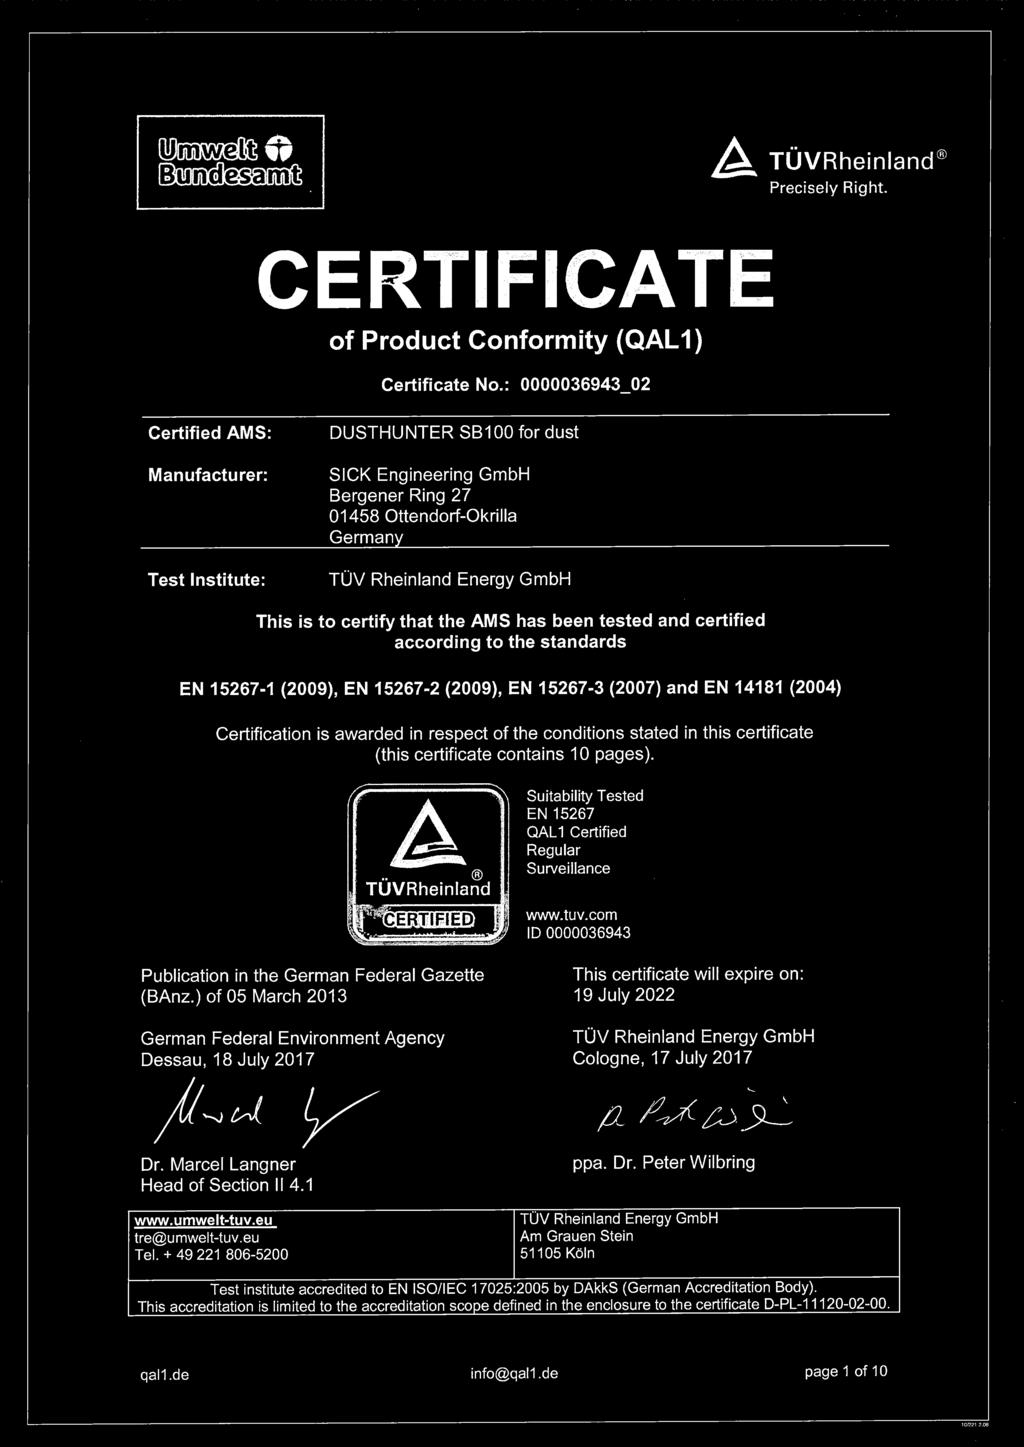 certify that the AMS has been tested and certified according to the standards EN 15267-1 (2009), EN 15267-2 (2009), EN 15267-3 (2007) and EN 14181 (2004) Certification is awarded in respect of the